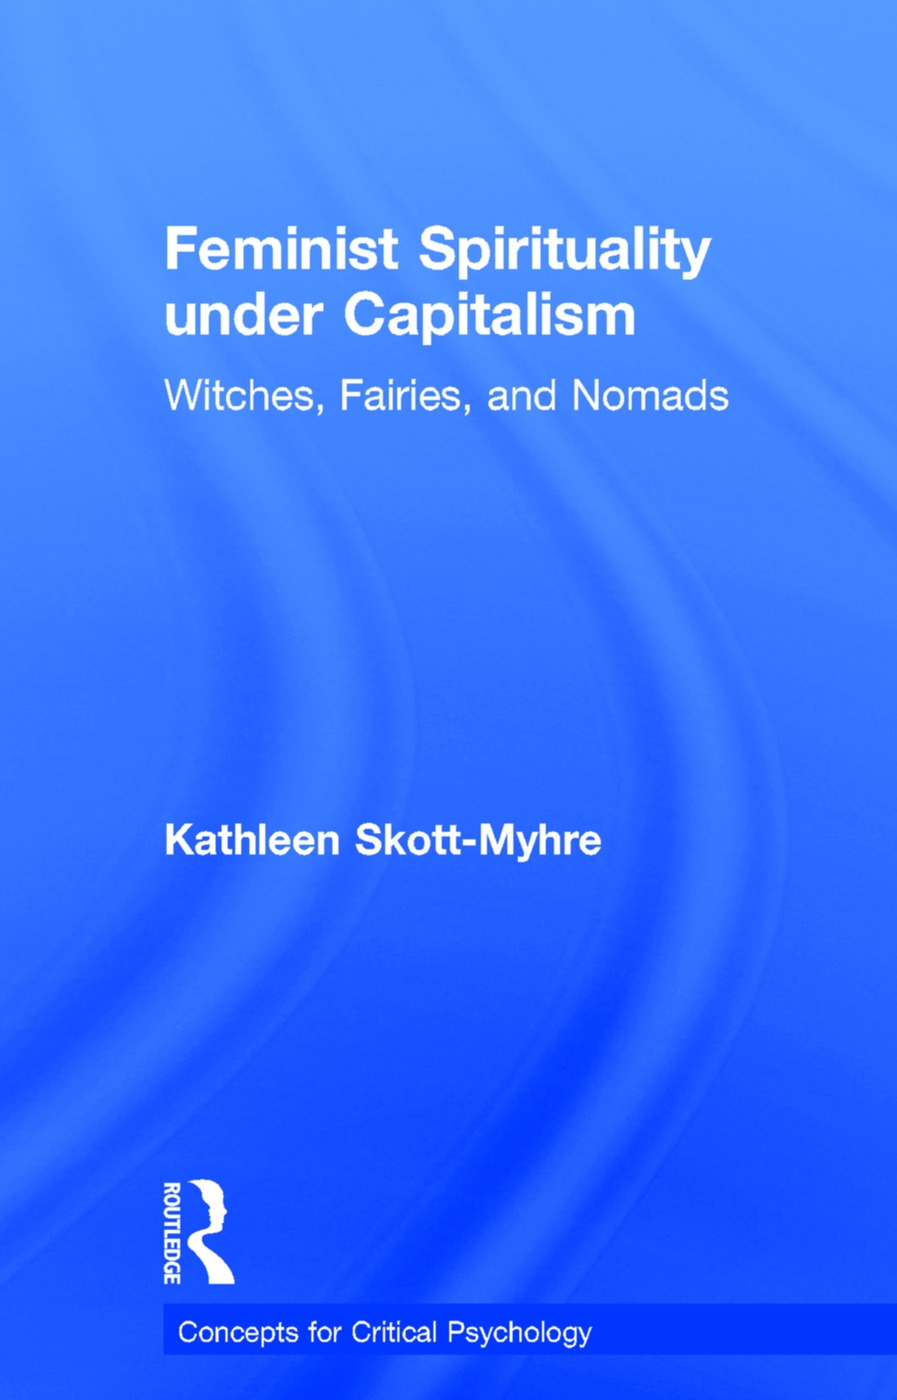 Feminist Spirituality Under Capitalism: Witches, Fairies, and Nomads